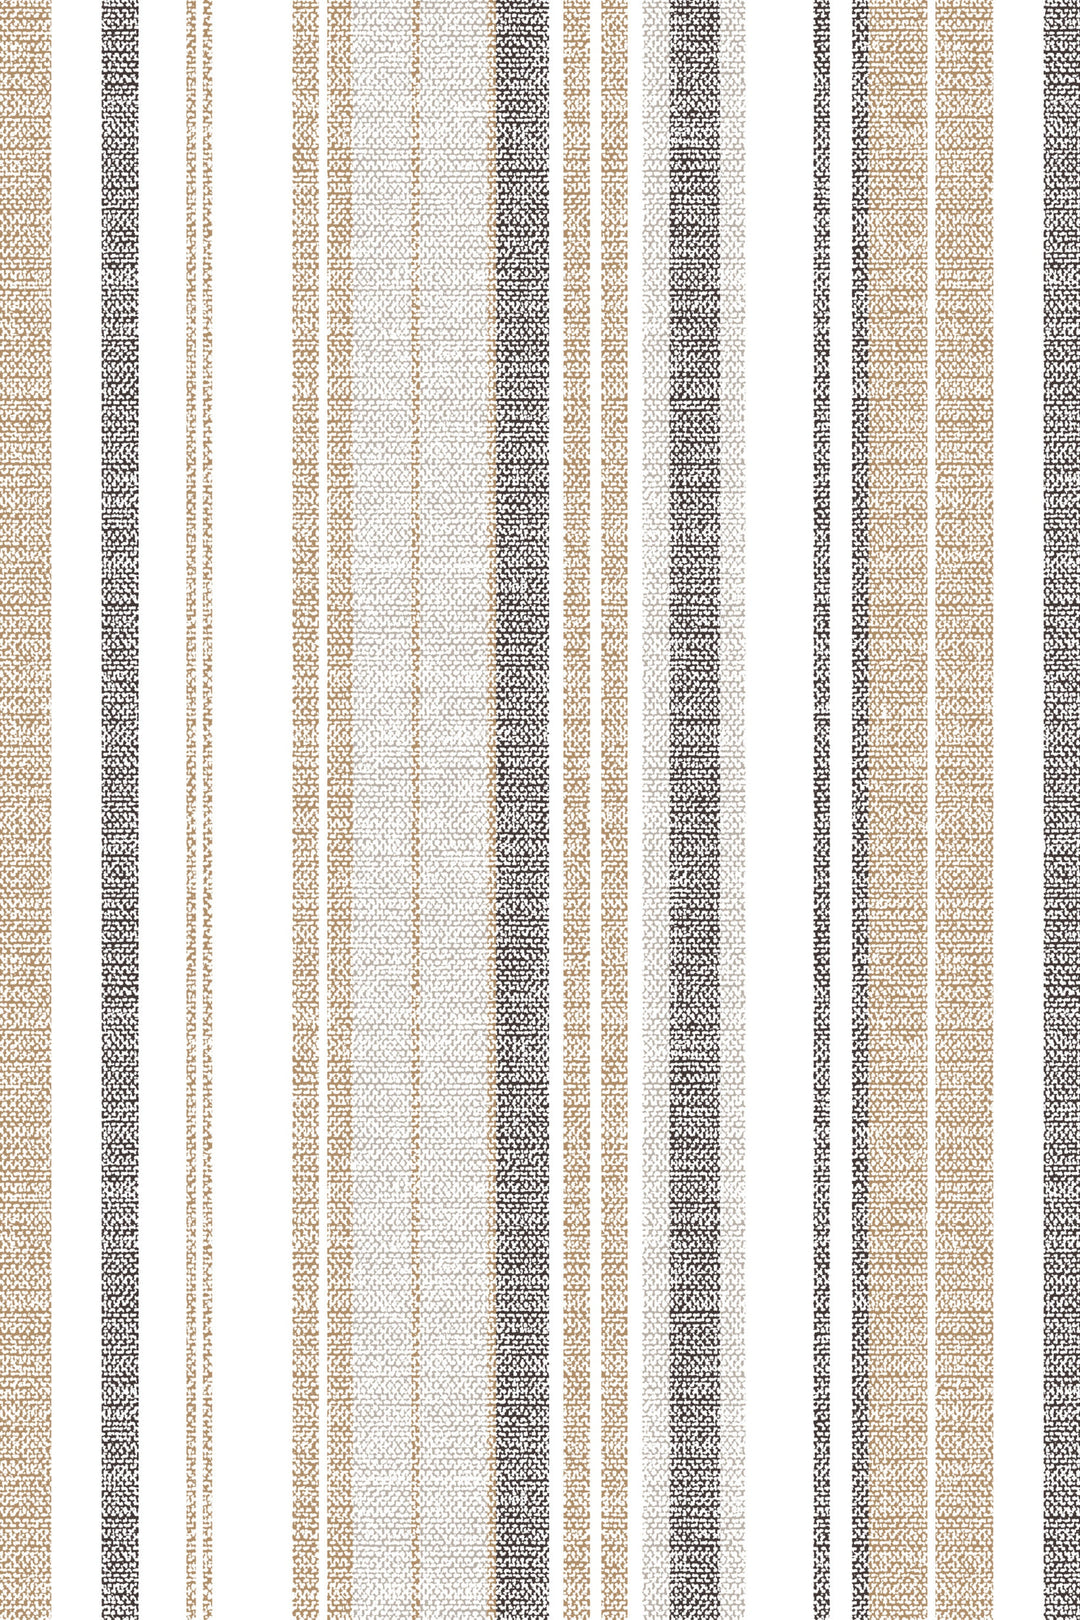 Multicolored linen wallpaper with stripes #63423